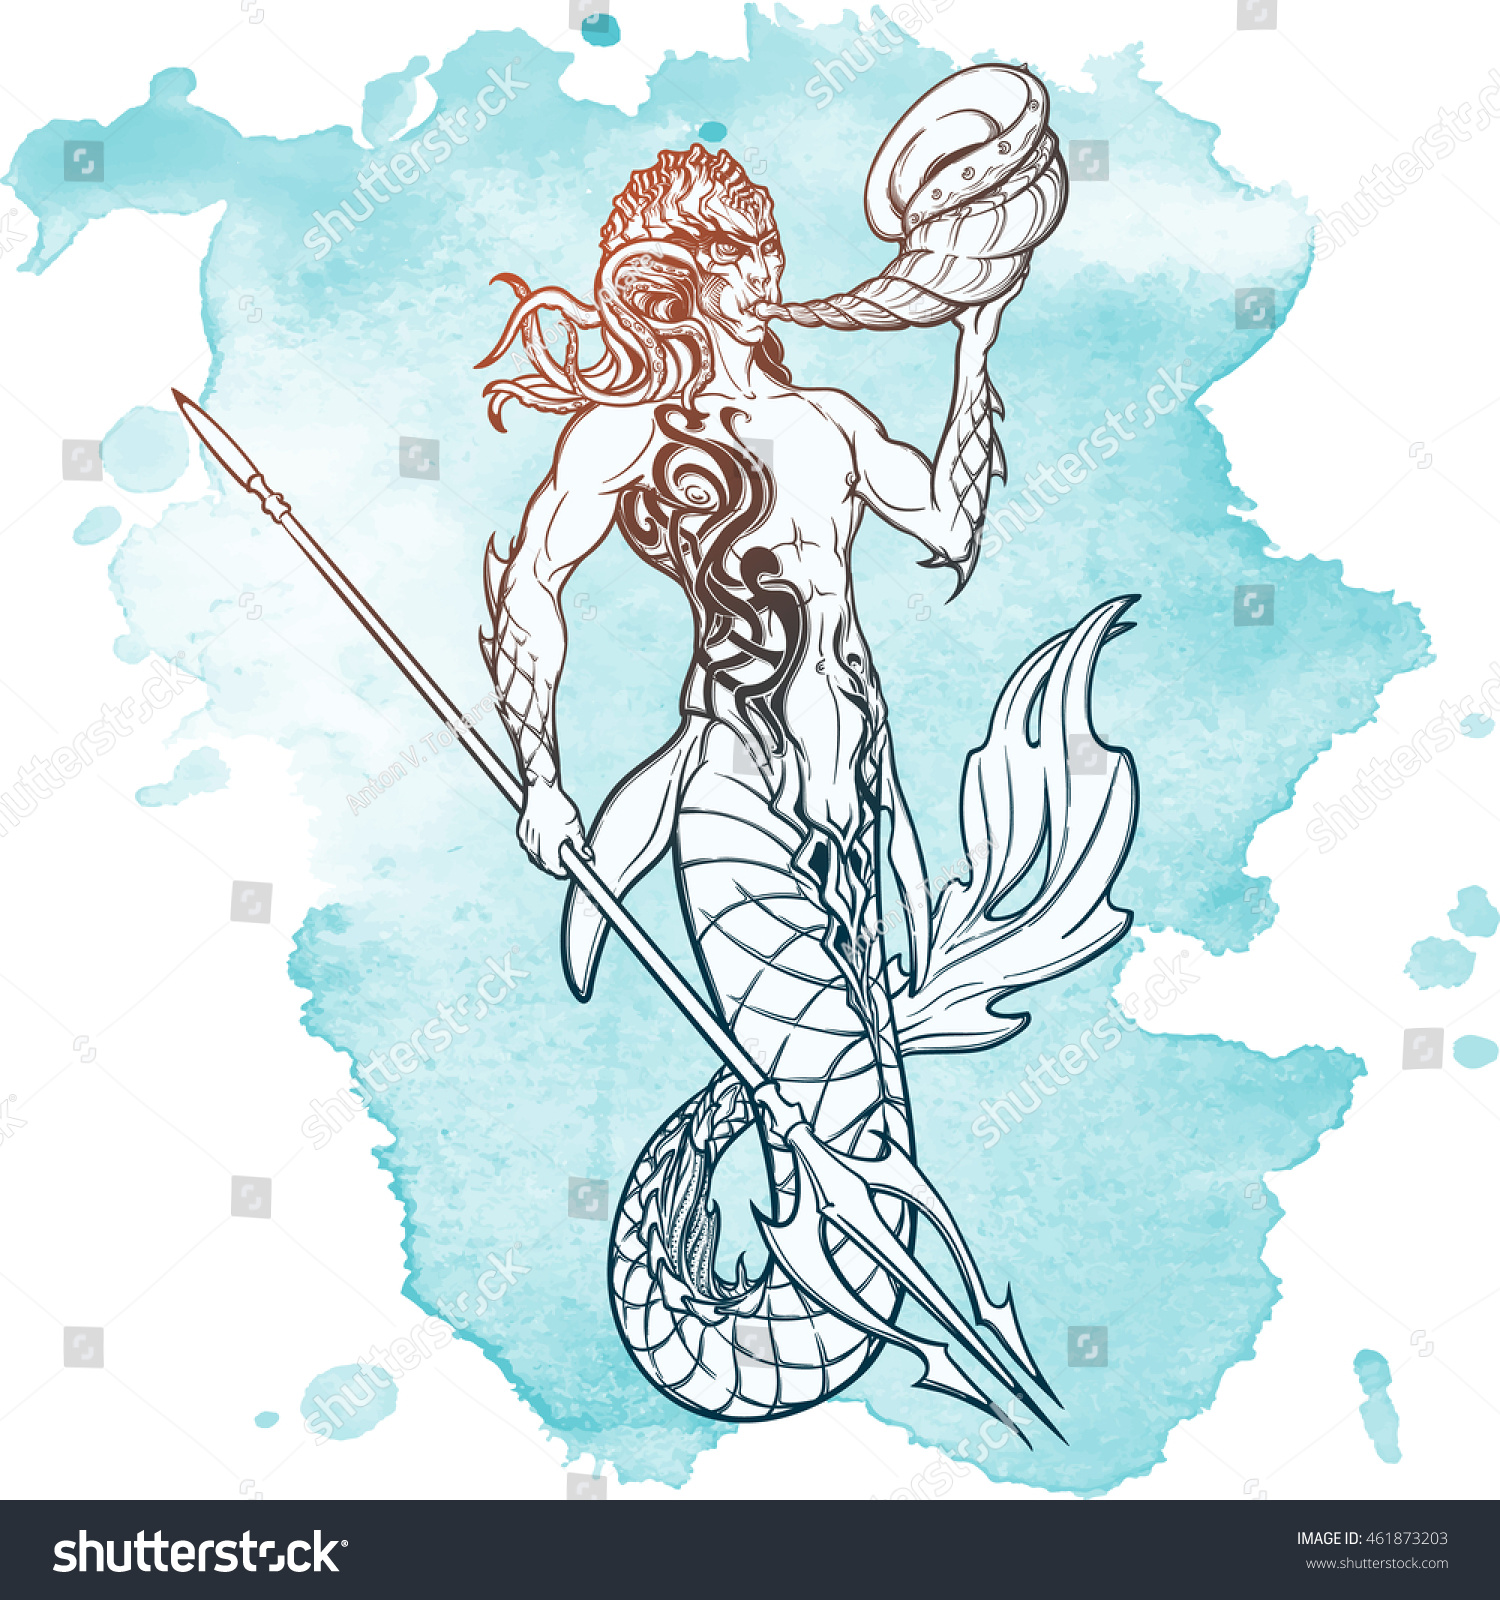 Merman Sketch Isolated On White Background Stock Vector 461873203